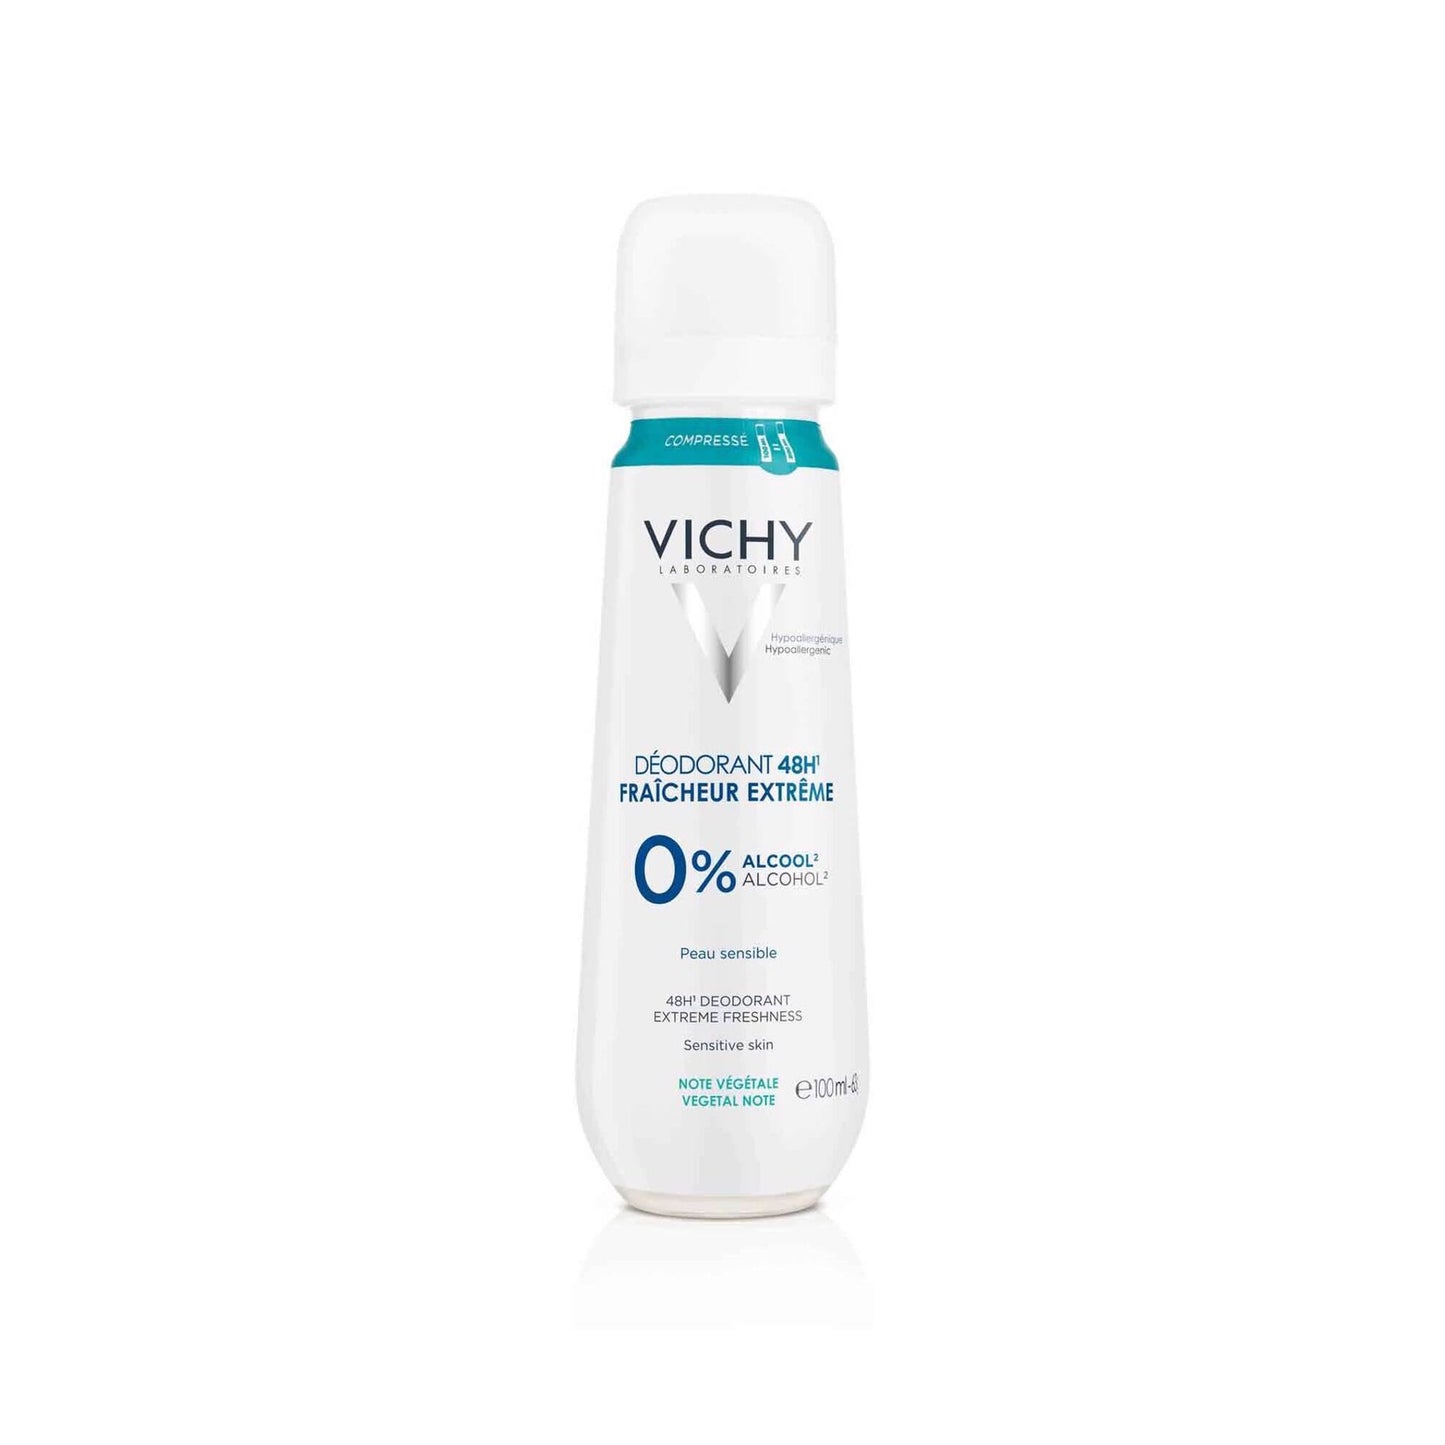 Vichy Deo Depilated Skin Roll-On - 50ml